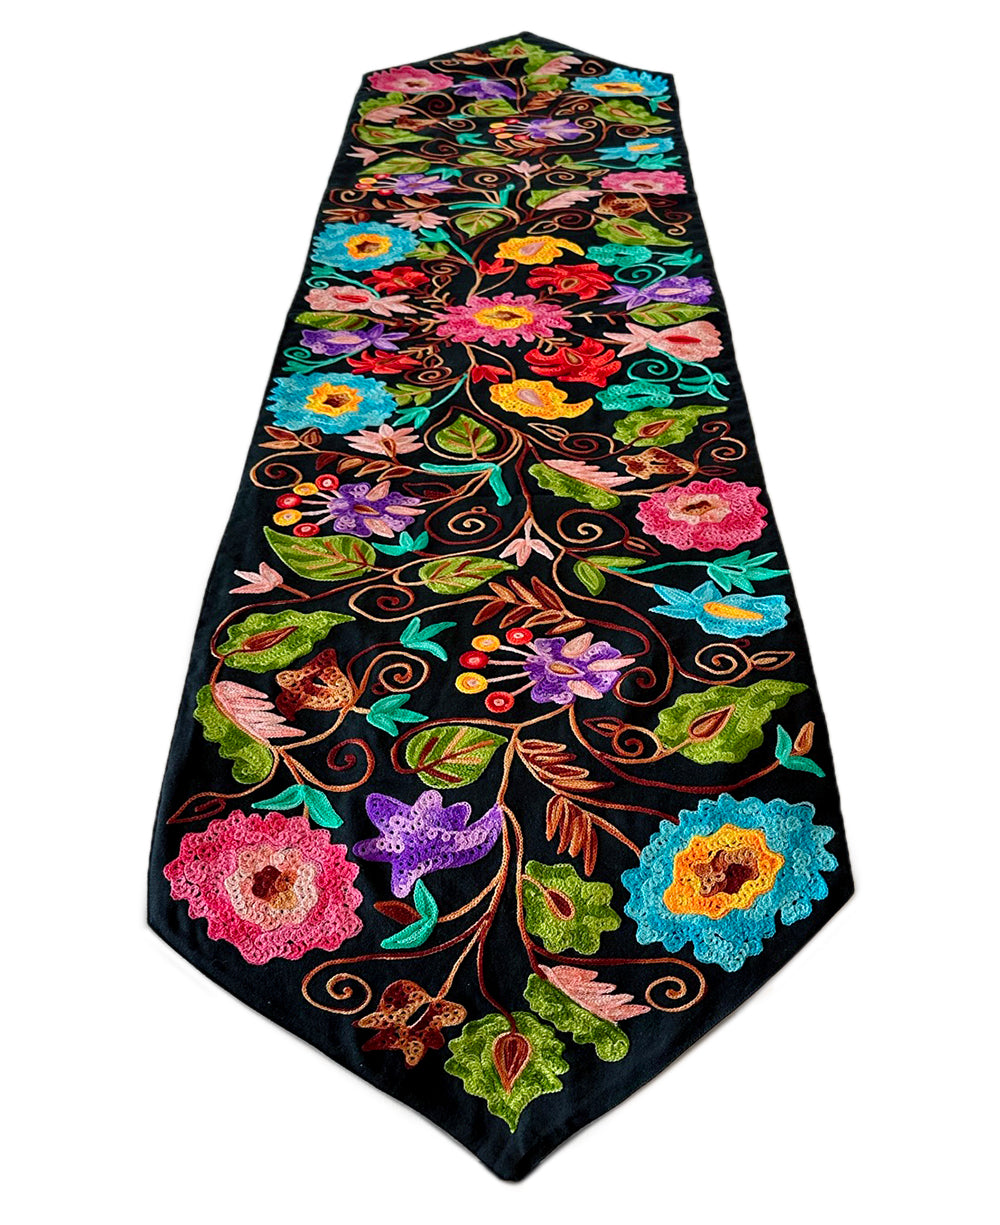 Enchanting Floral Motif Embroidered Table Runner